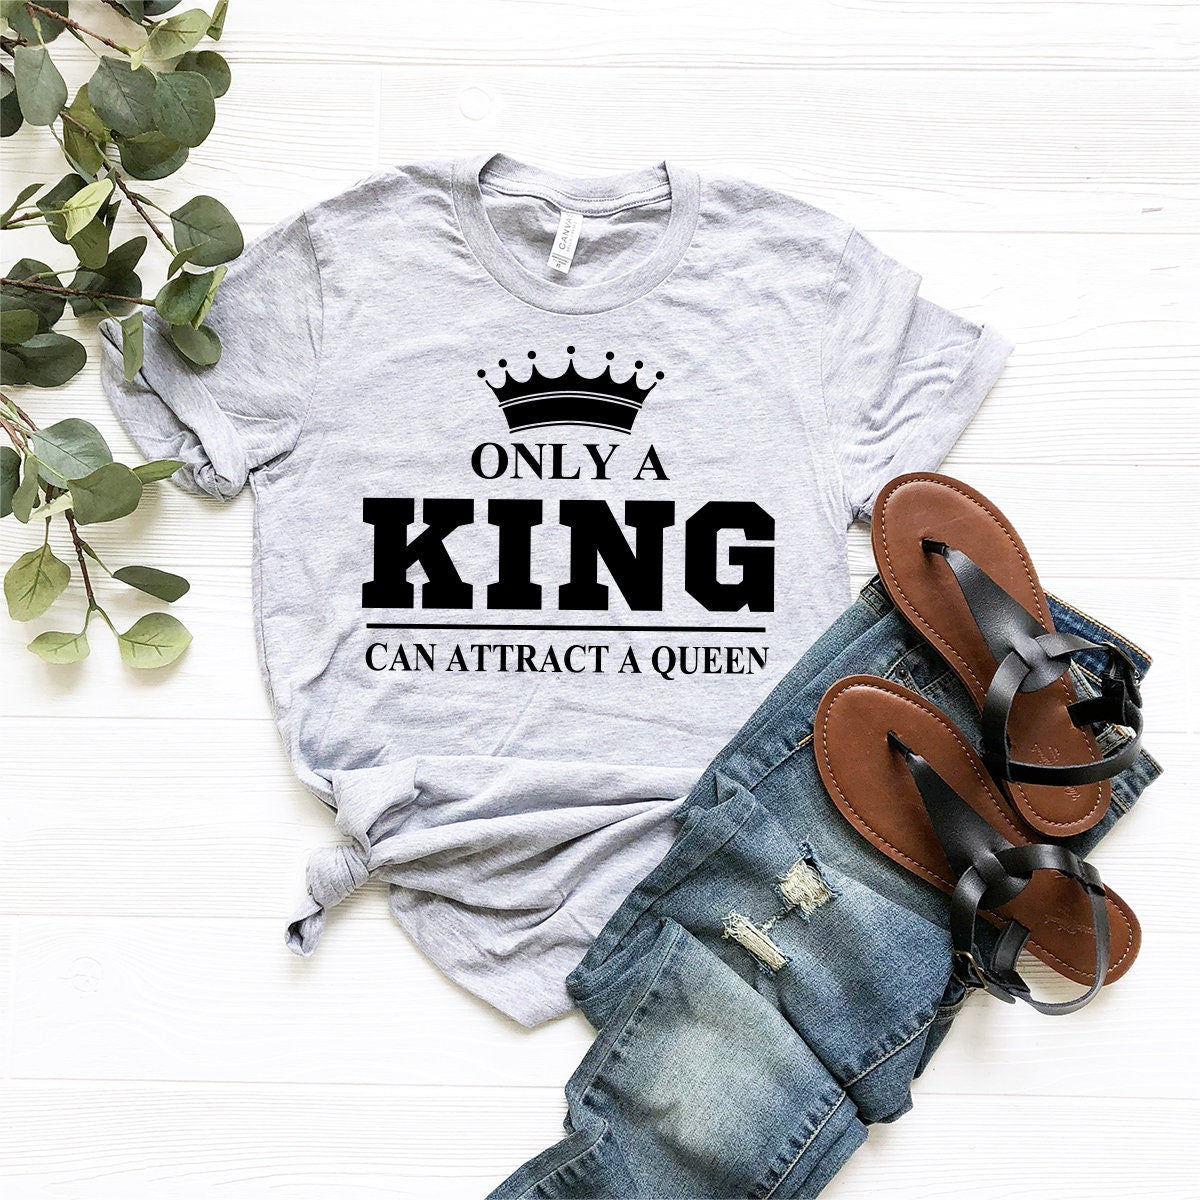 Funny Couples Shirt, Matching Couples Tee, Couple T-Shirt, Only A Queen King Can Attract A Queen, Only A King Can Keep A King Focused Shirt, - Fastdeliverytees.com